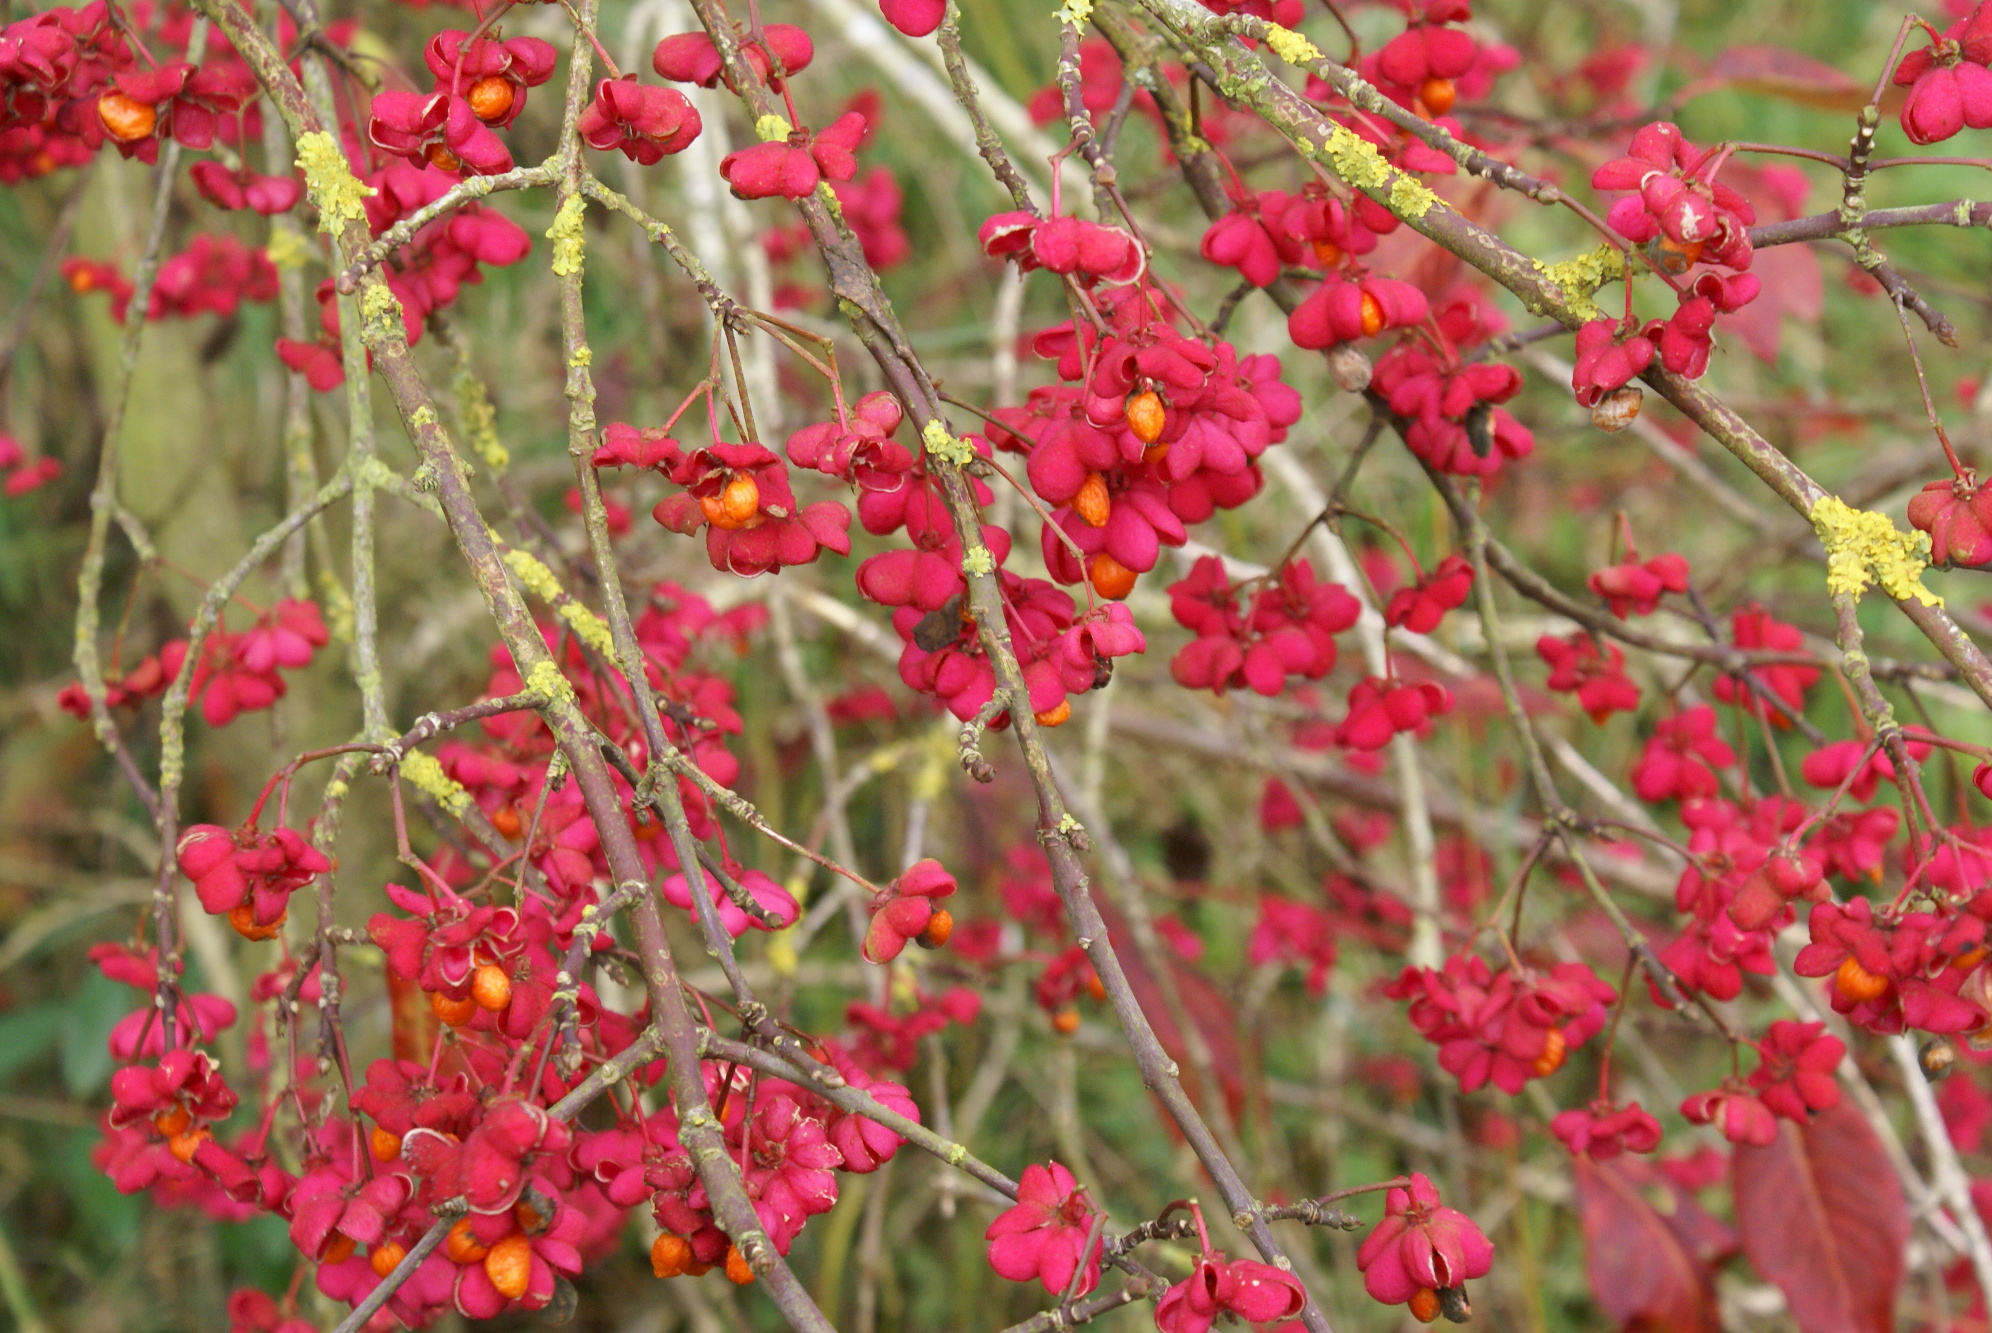 Spindle tree fruits